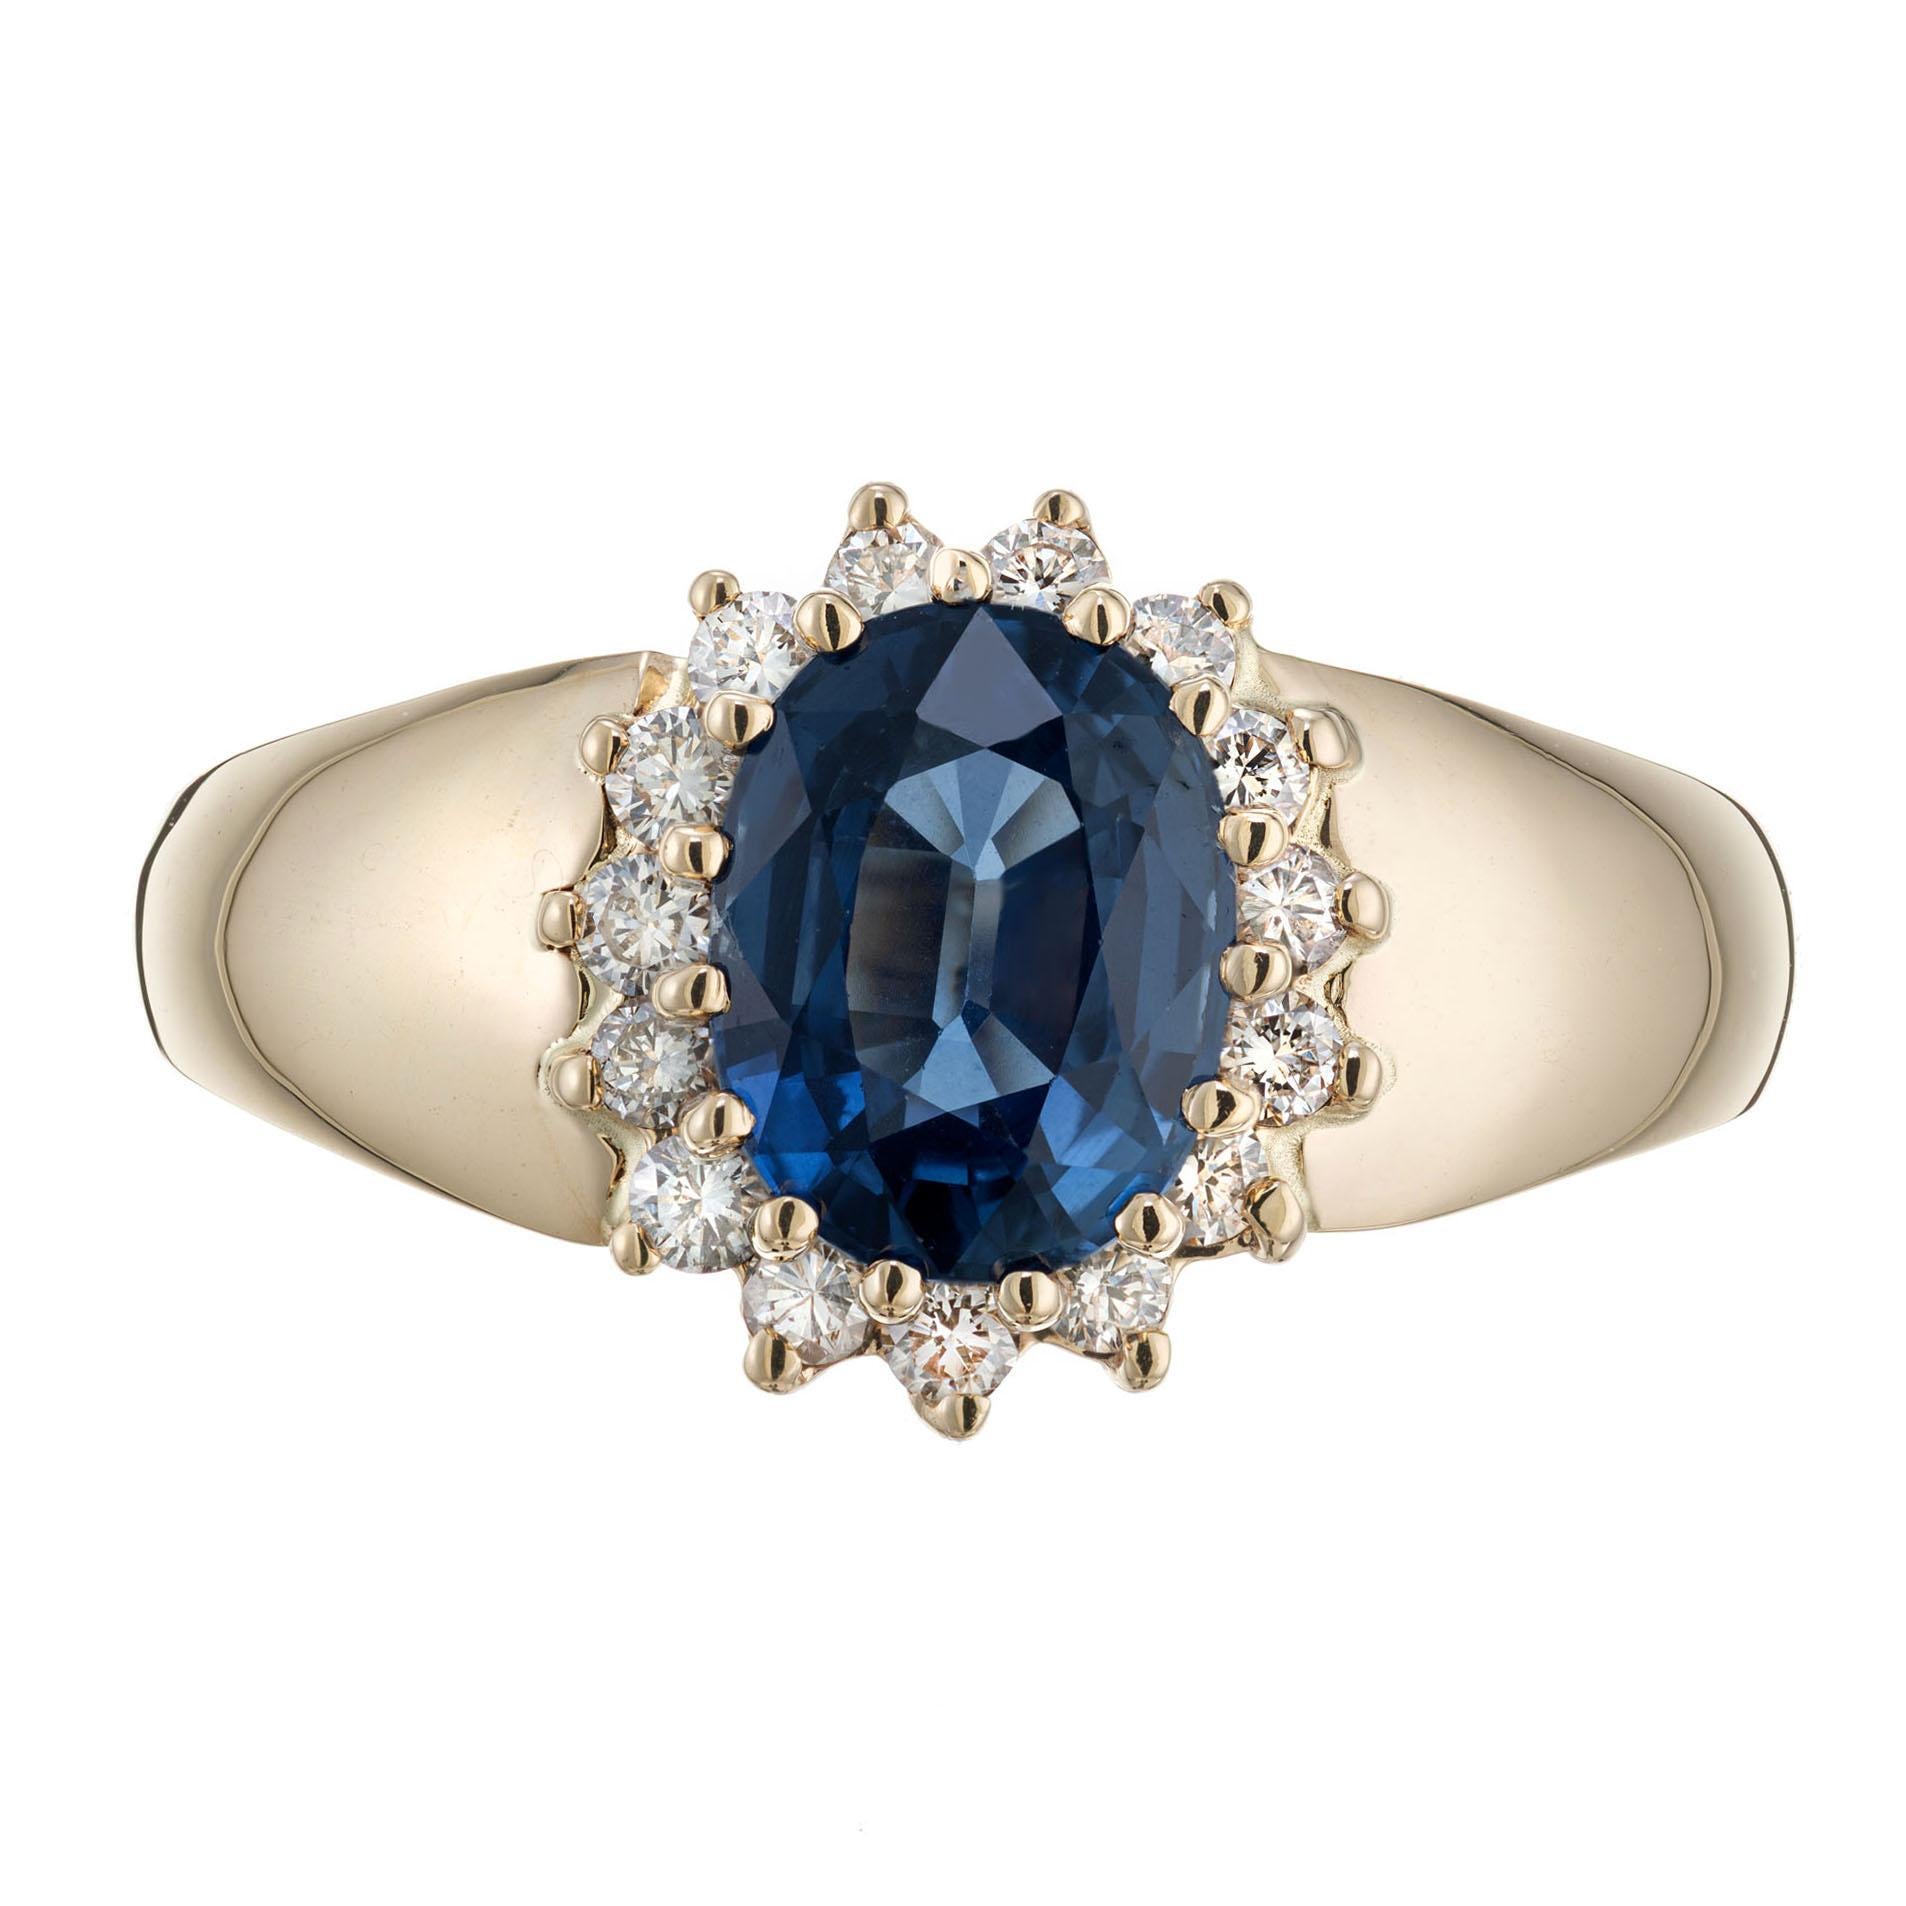 Sapphire and diamond engagement ring. Oval Ceylon sapphire center stone in a 14k yellow gold setting with a halo of 18 round diamonds. Alfred Butler hallmark.  

1 oval Ceylon sapphire approx. total weight 2.00cts
18 round diamonds approx. total